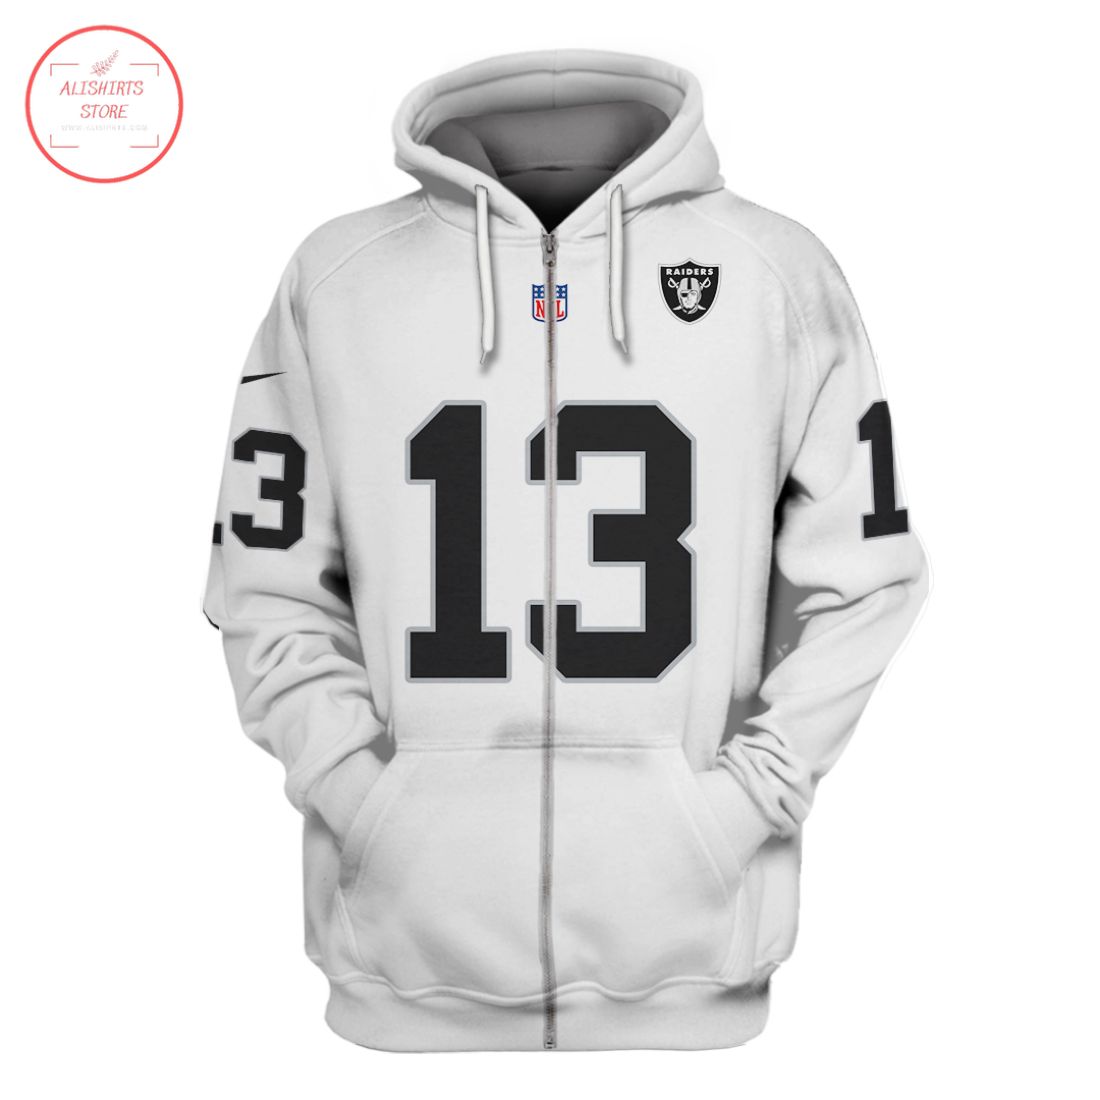 NFL Oakland Raiders Renfrow White Shirt and Hoodie